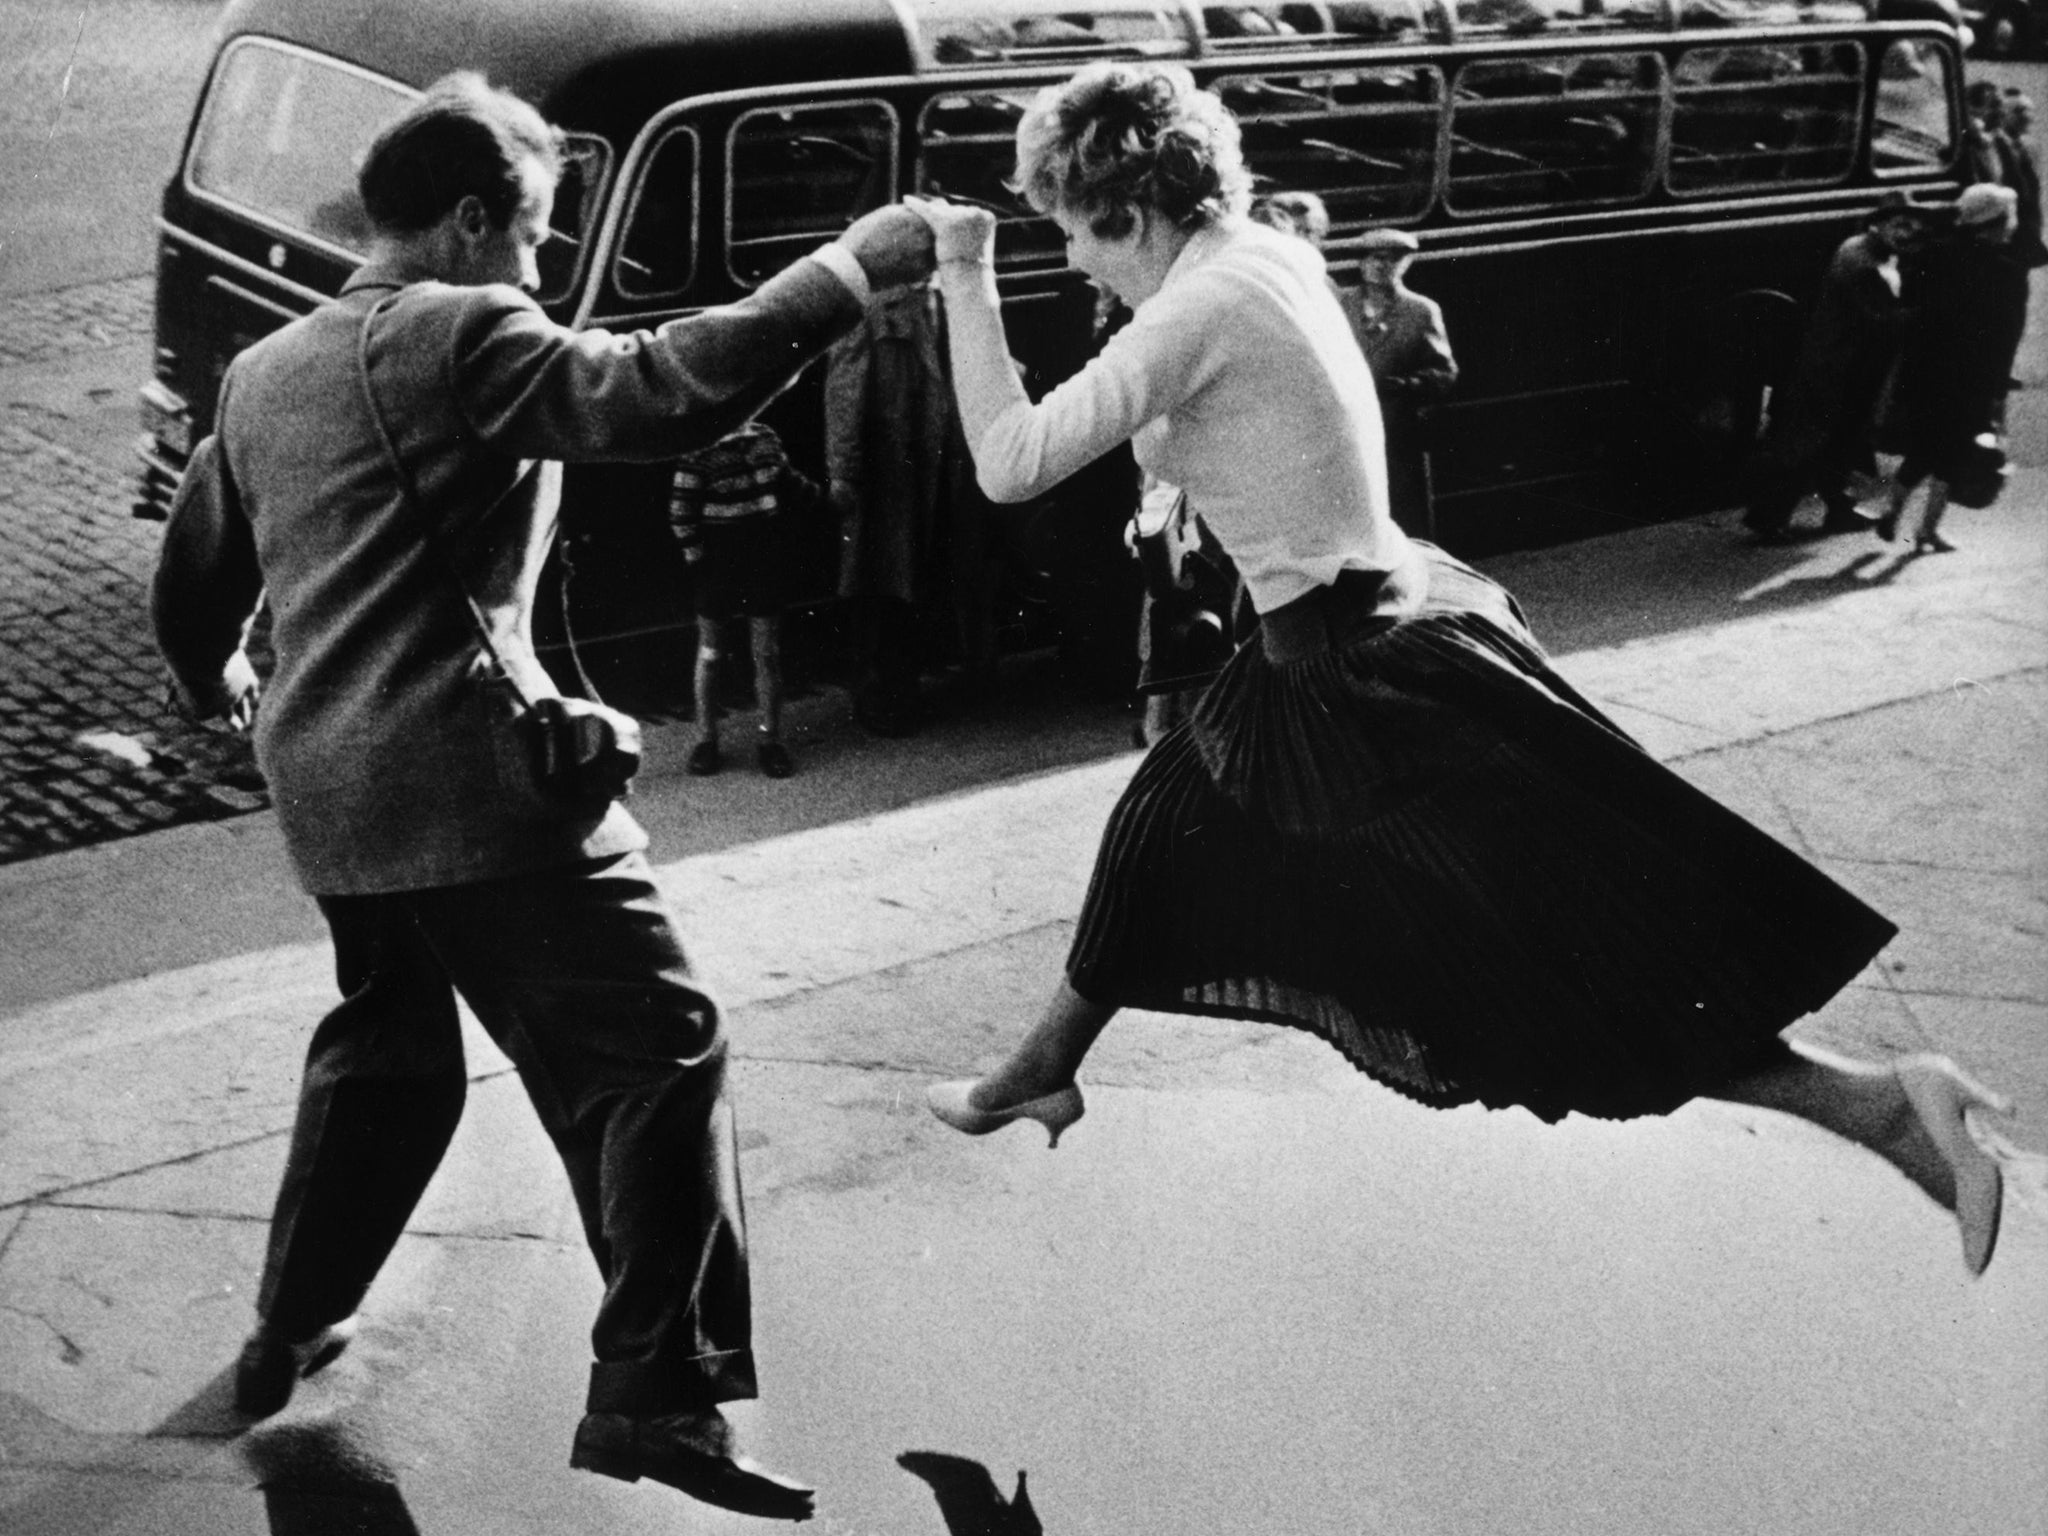 A man gives a woman a helping hand as she takes a flying leap over a large puddle on the pavement